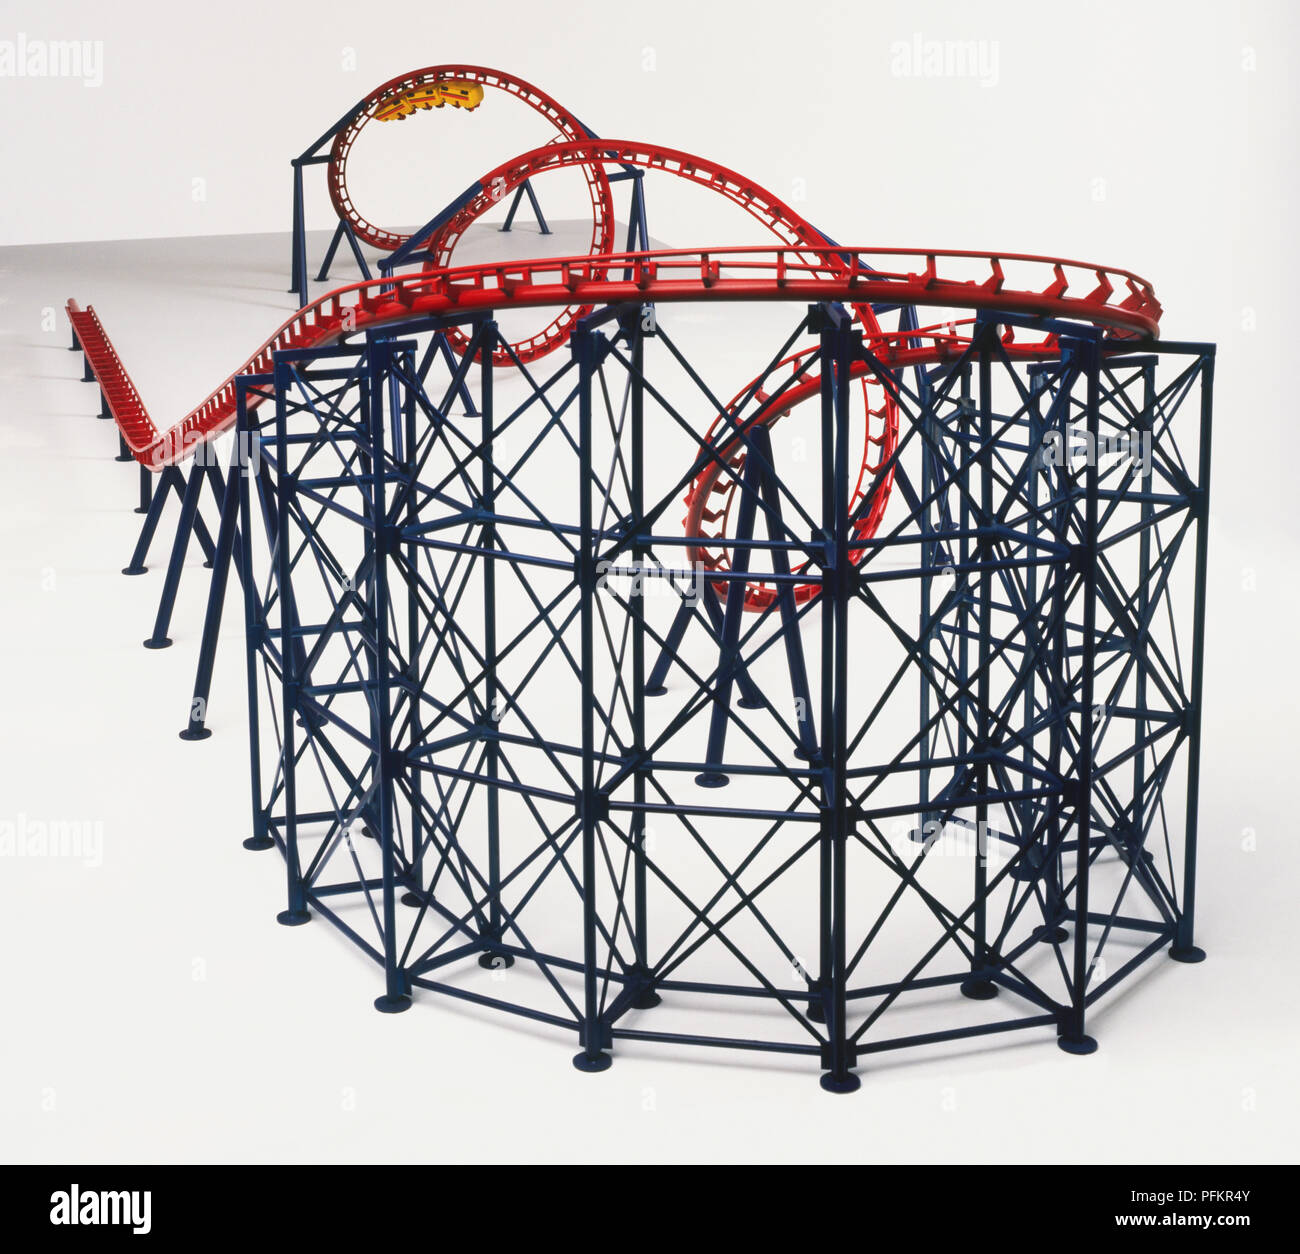 Structural model of roller coaster ride, high angle view Stock Photo